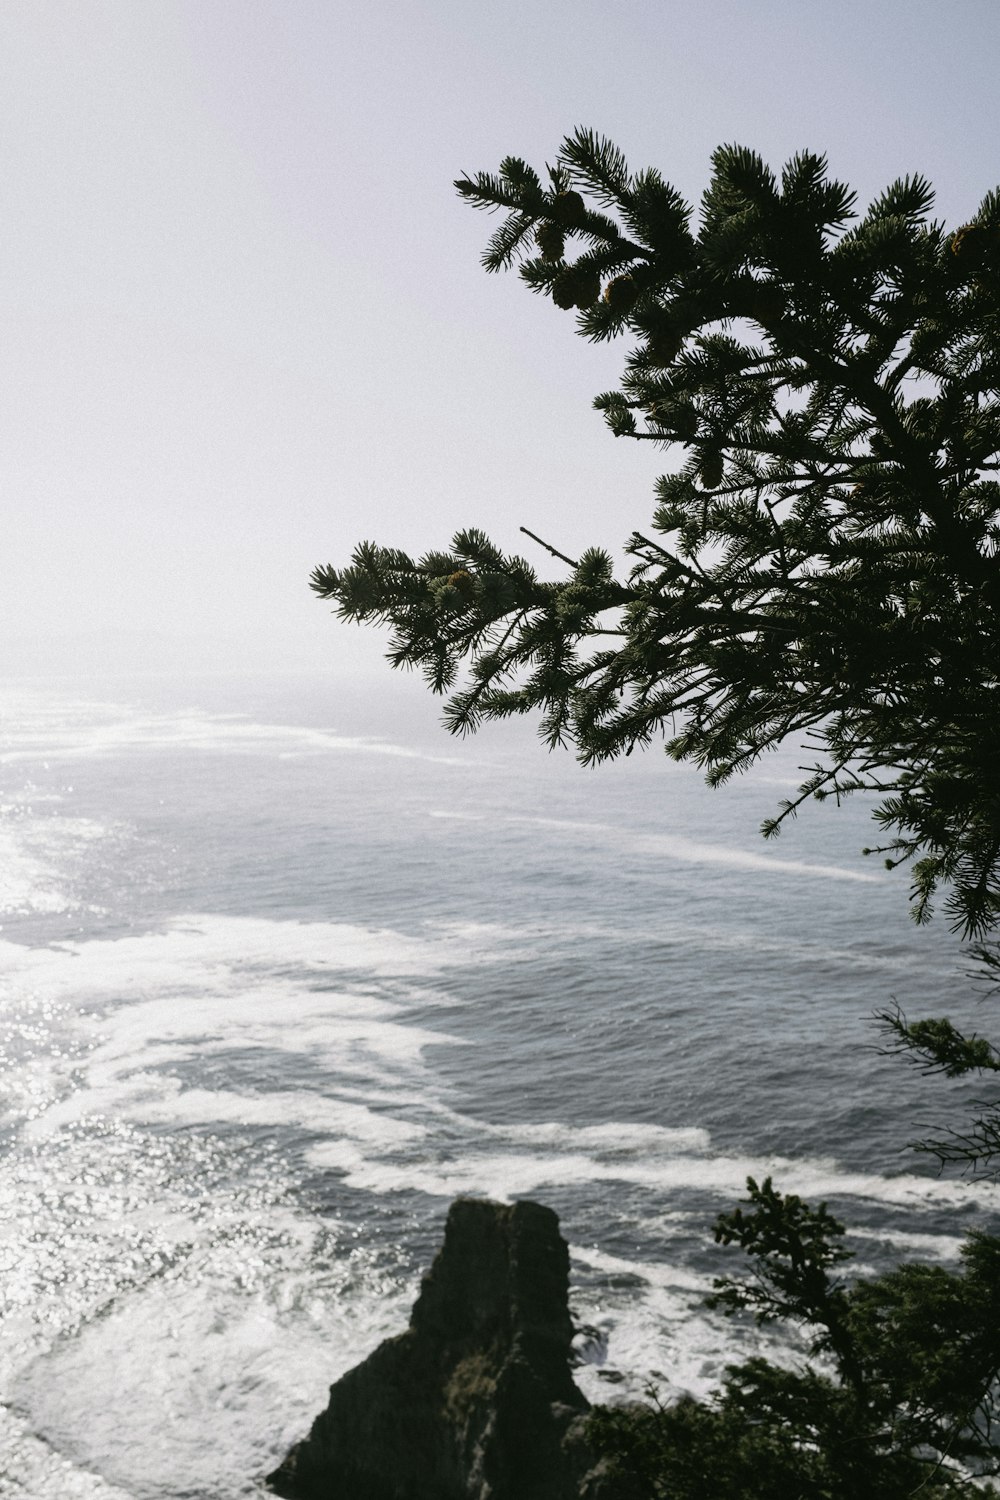 a tree on a cliff above the ocean